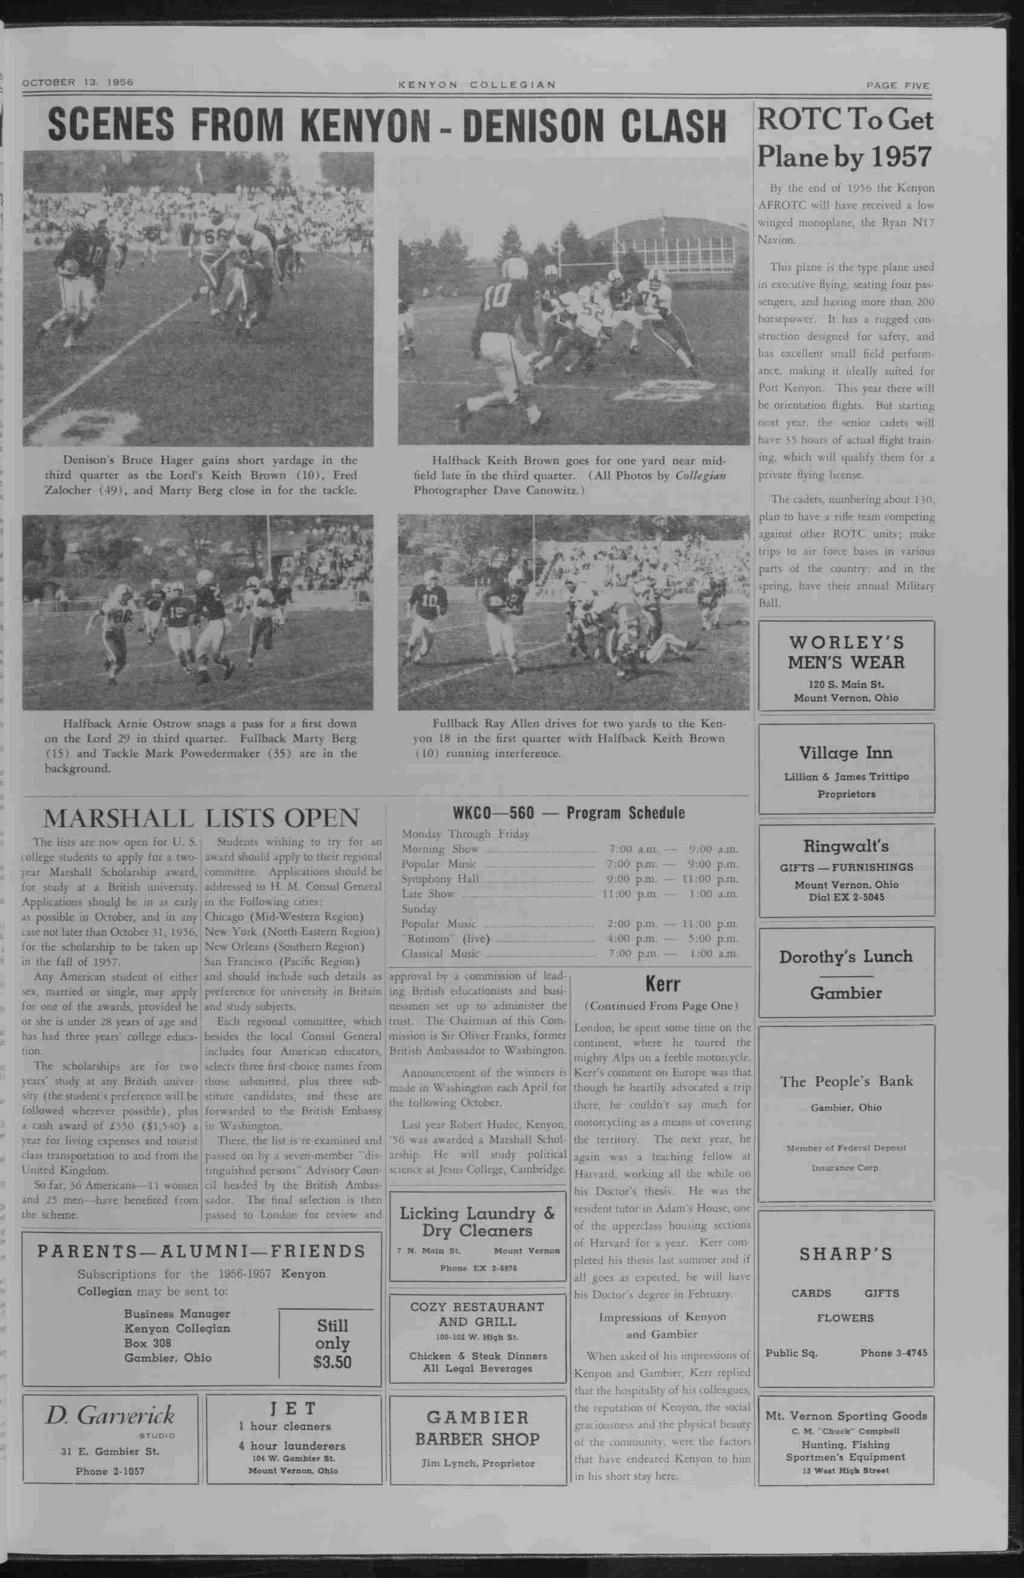 976 45 OCTOBER 3, 956 KENYON COLLEGAN PAGE FVE SCENES FROM (Era - DENSON CLASH ROTC To Get Plane by 957 Densons Bruce Hager gans short yardage n the thrd quarter as the Lords Keth Brown (0), Fred